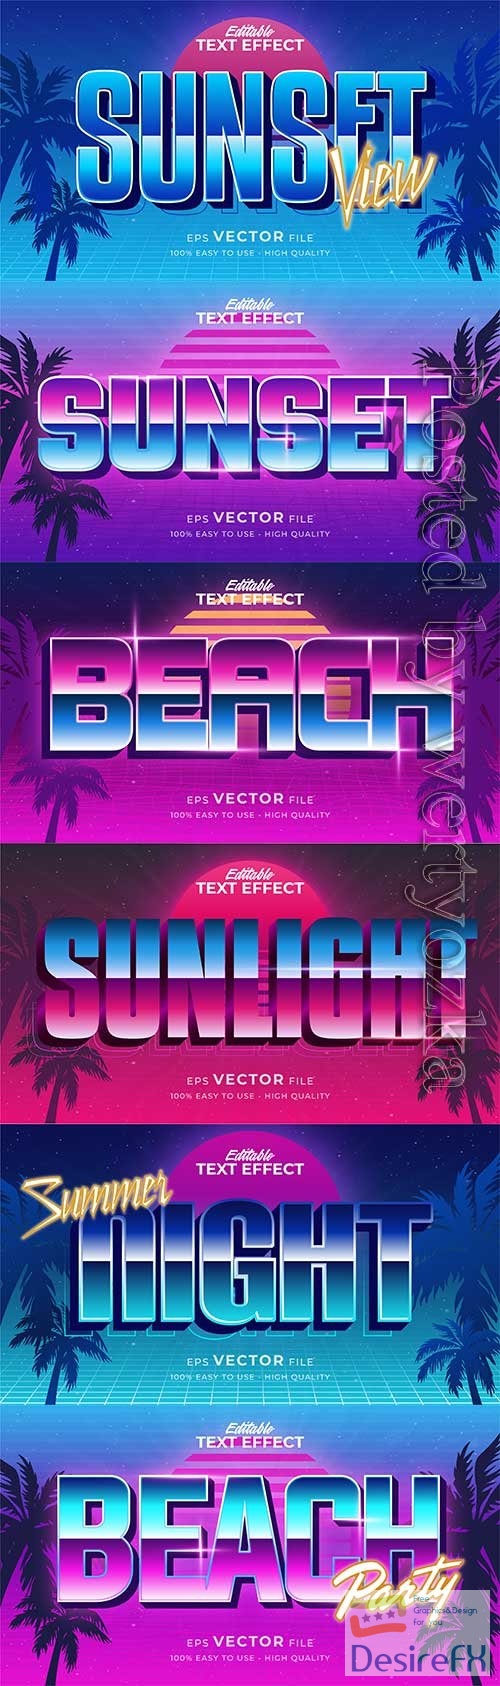 Retro summer holiday text in grunge style theme in vector vol 13